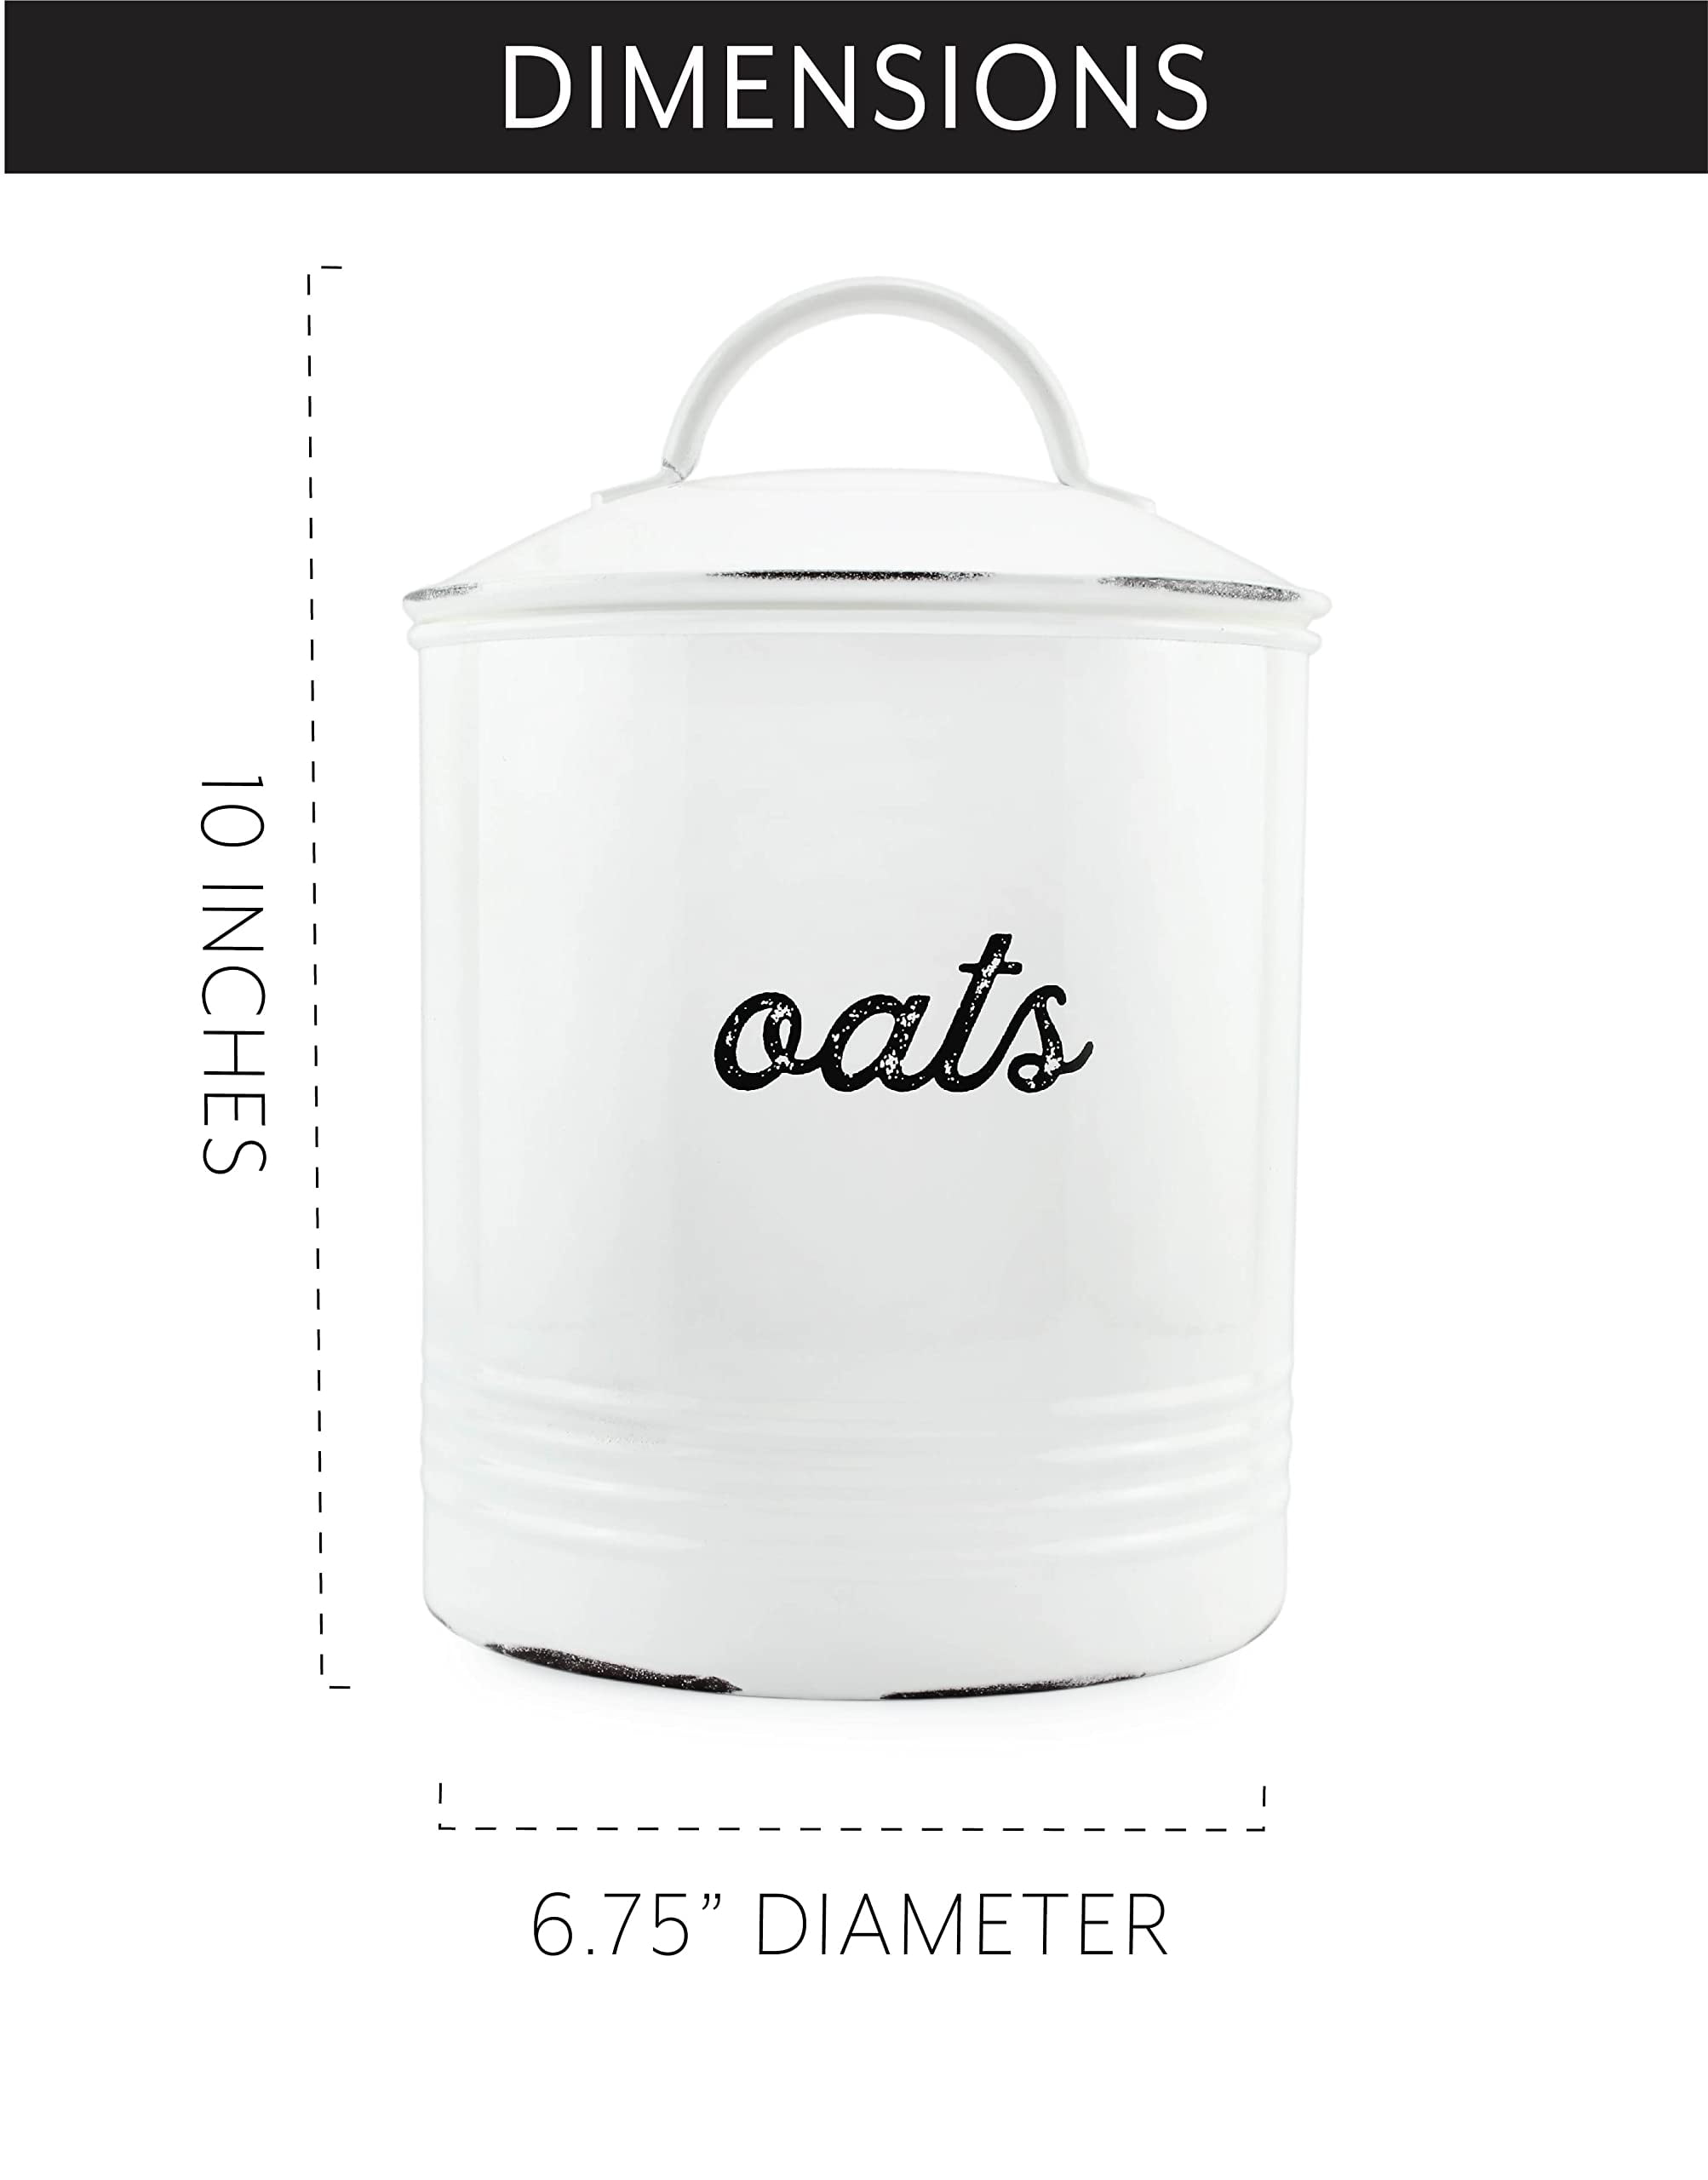 AuldHome Enamelware Protein Powder Canister (Black); Modern Farmhouse Style Storage for Kitchen